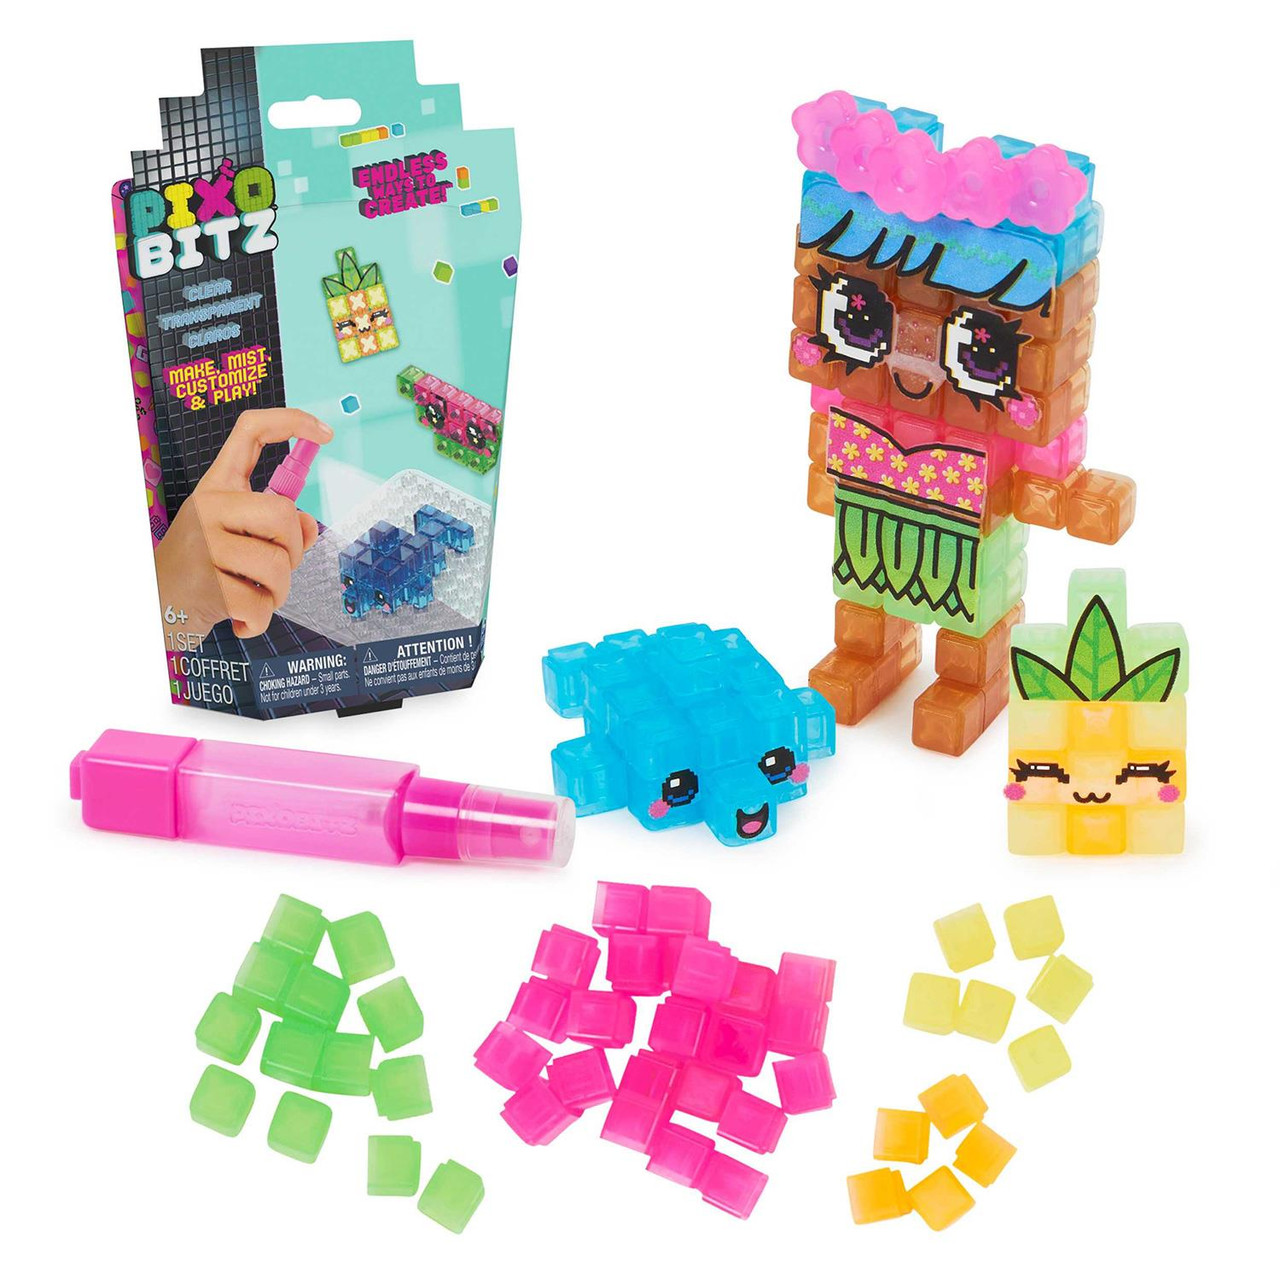 PixoBitz Clear Beads Pack - The Toy Barn